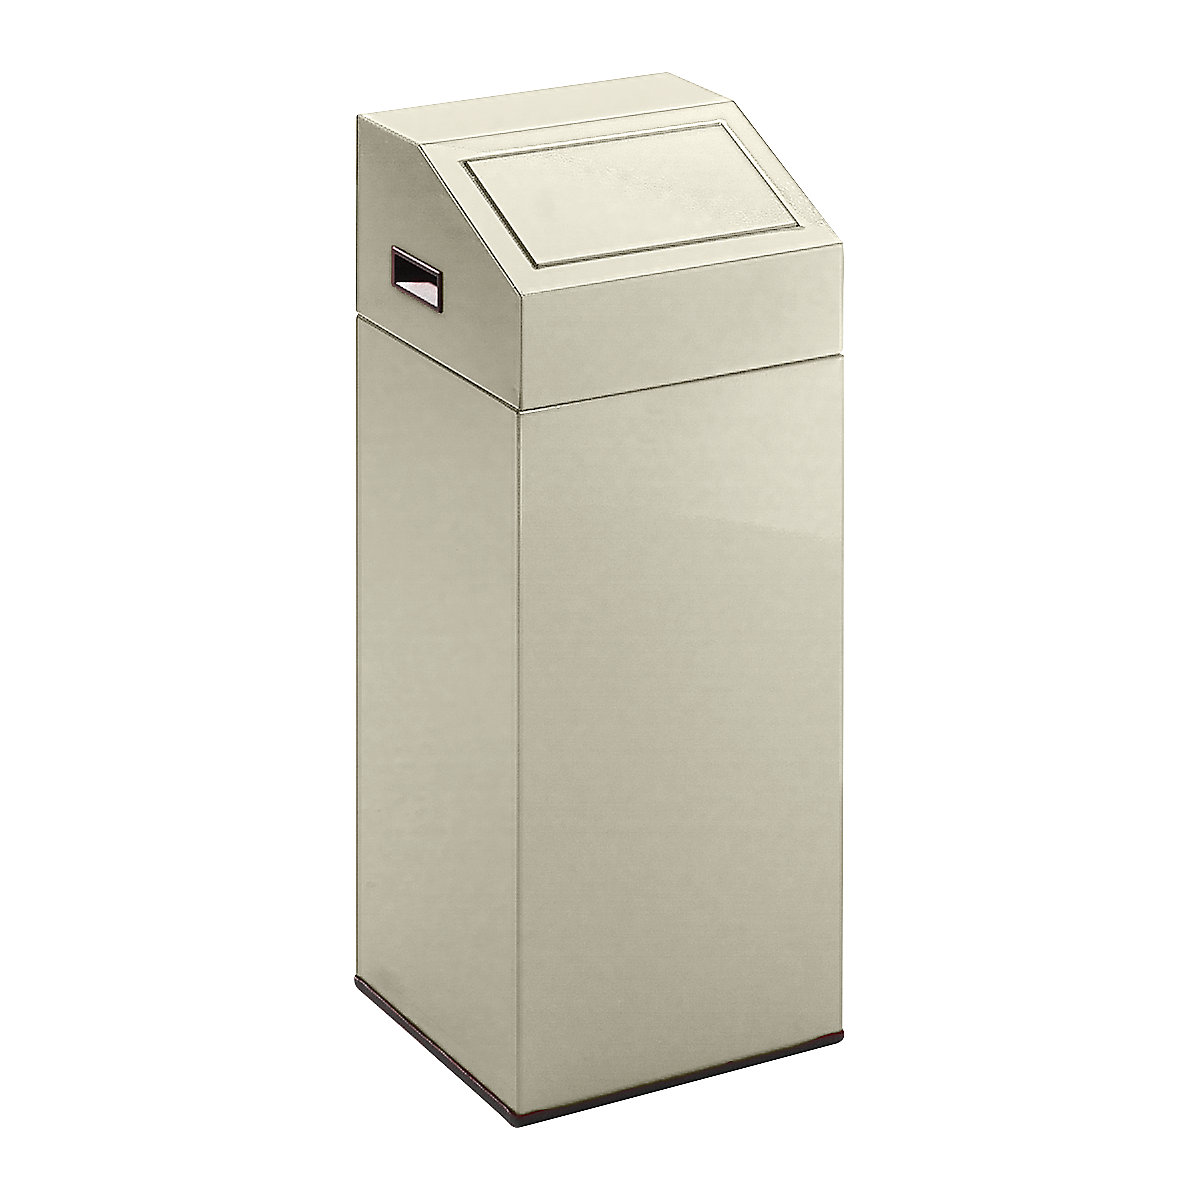 EUROKRAFTpro – Recyclable waste collector, capacity 45 l, WxHxD 320 x 790 x 320 mm, pebble grey